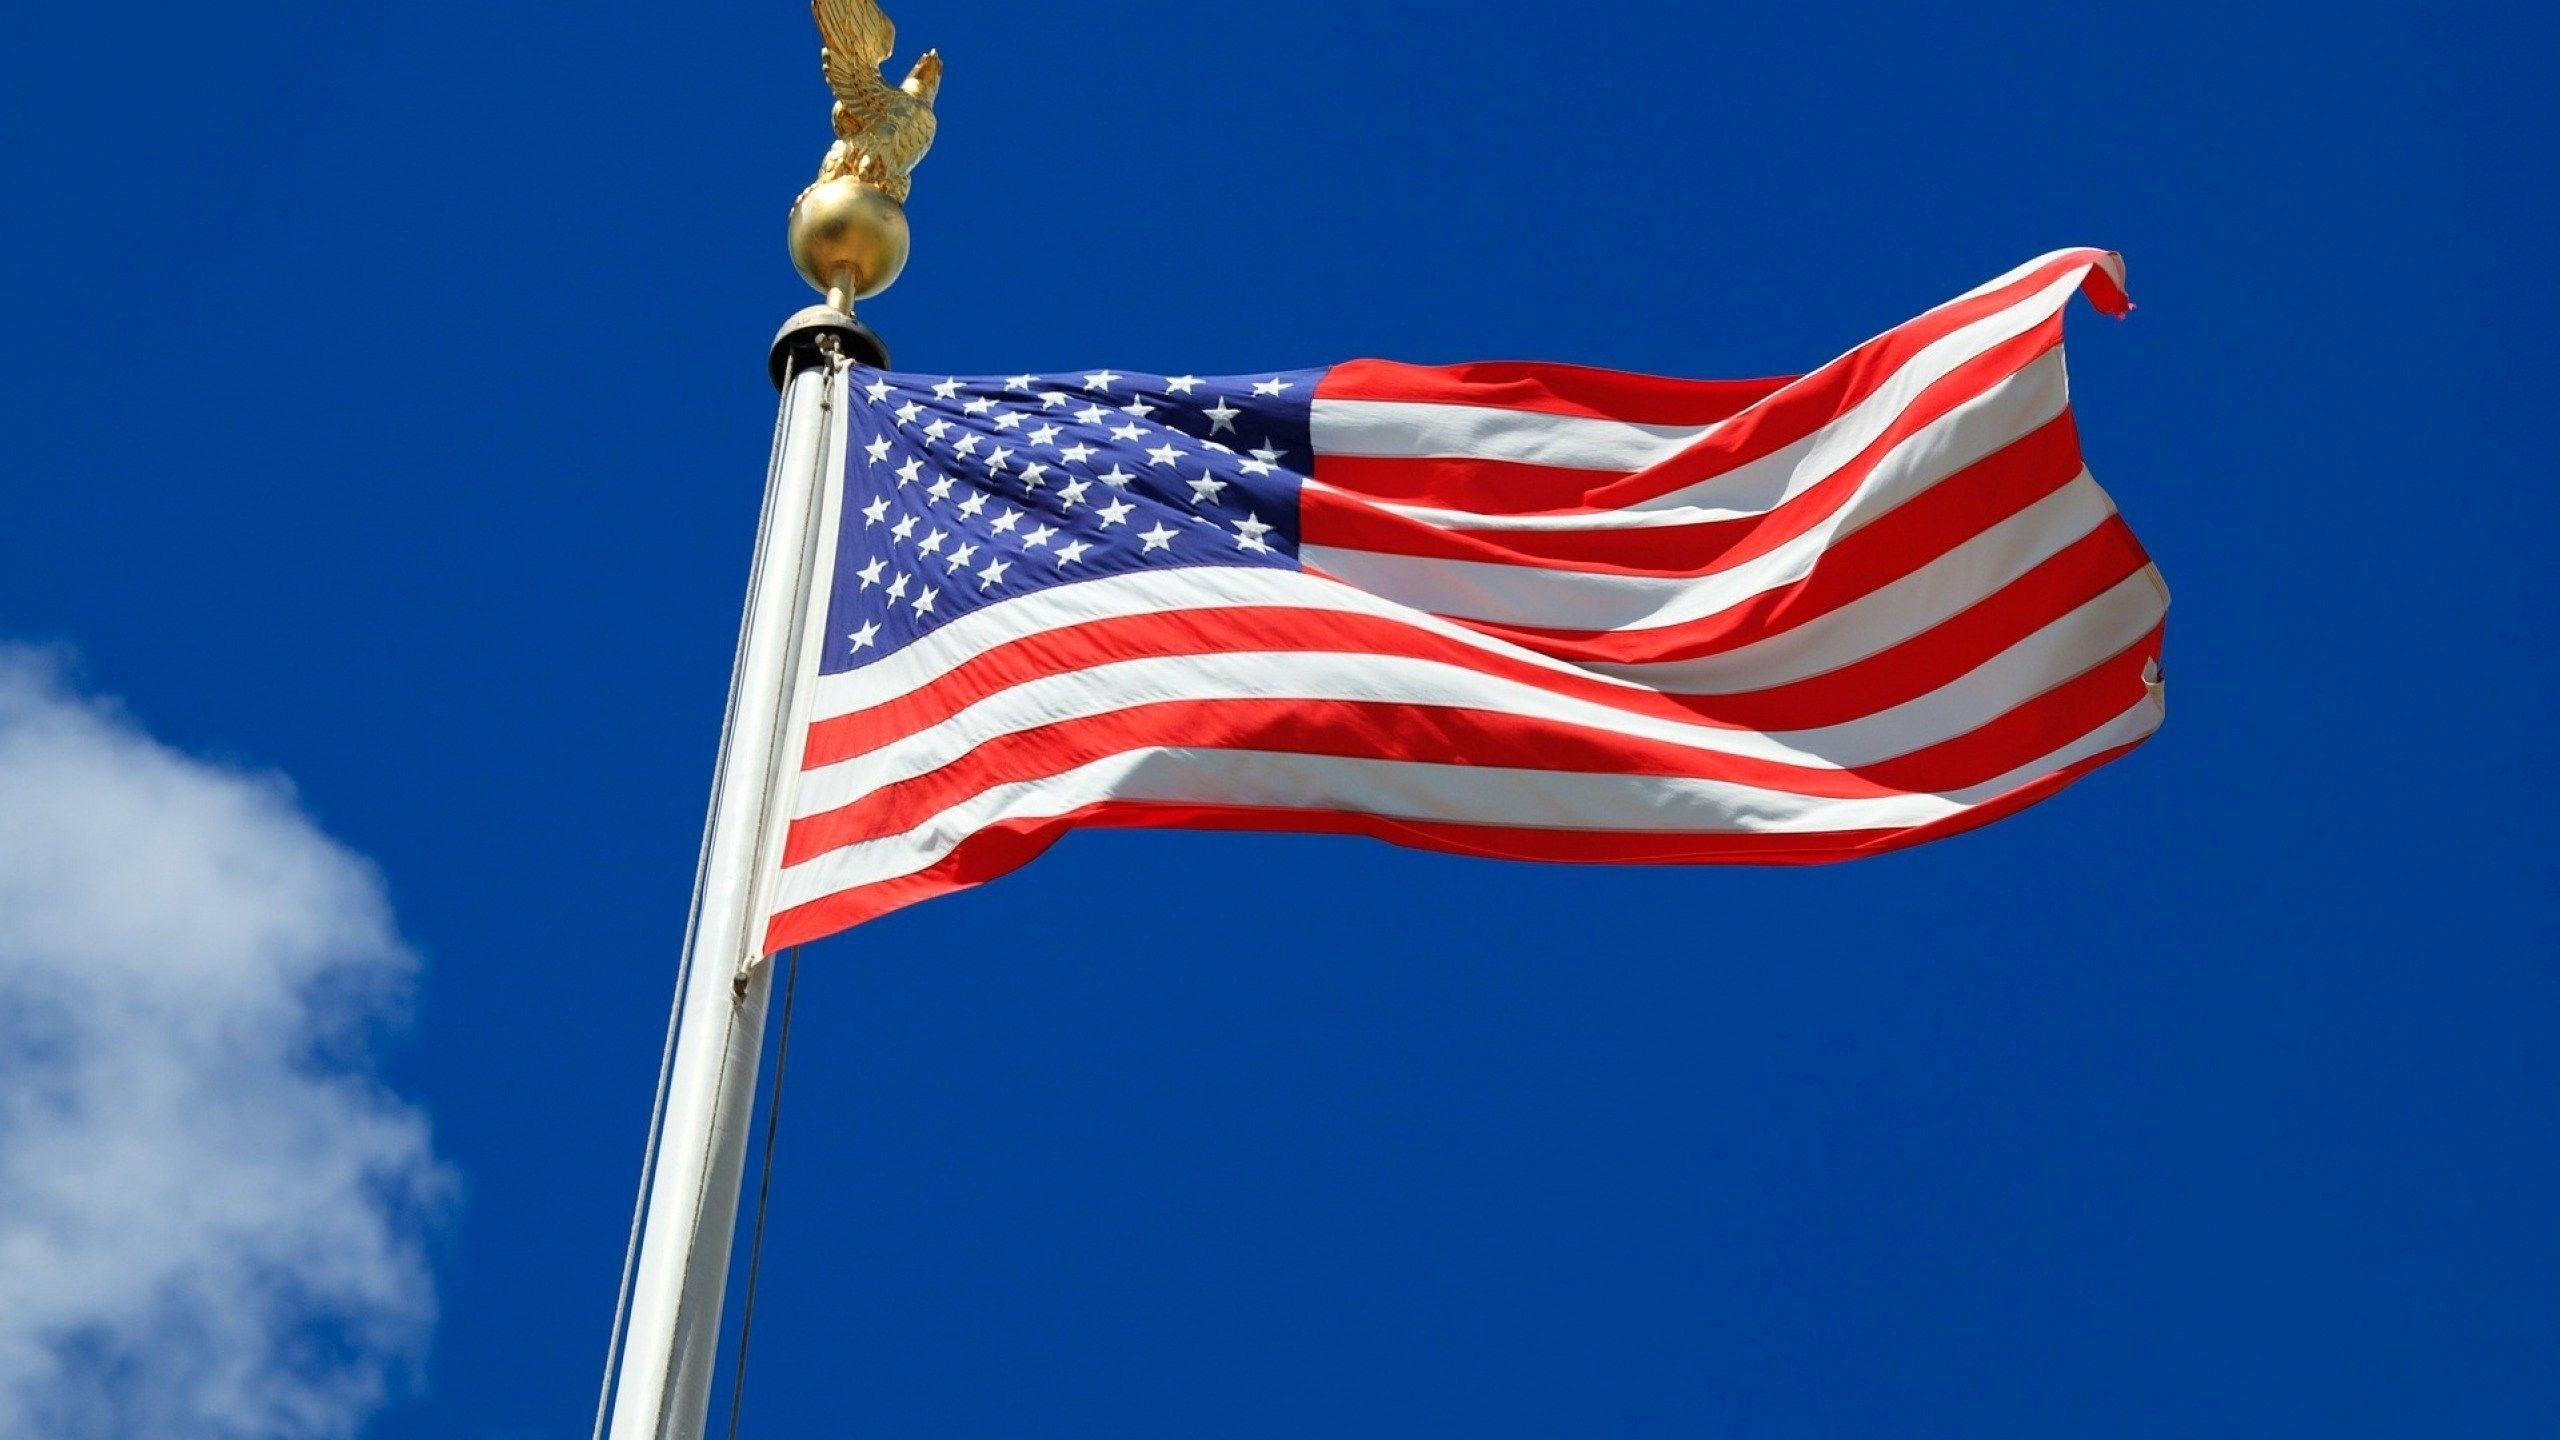 2560x1440 American Flag Iphone Wallpaper Fresh 79 Best American Images On